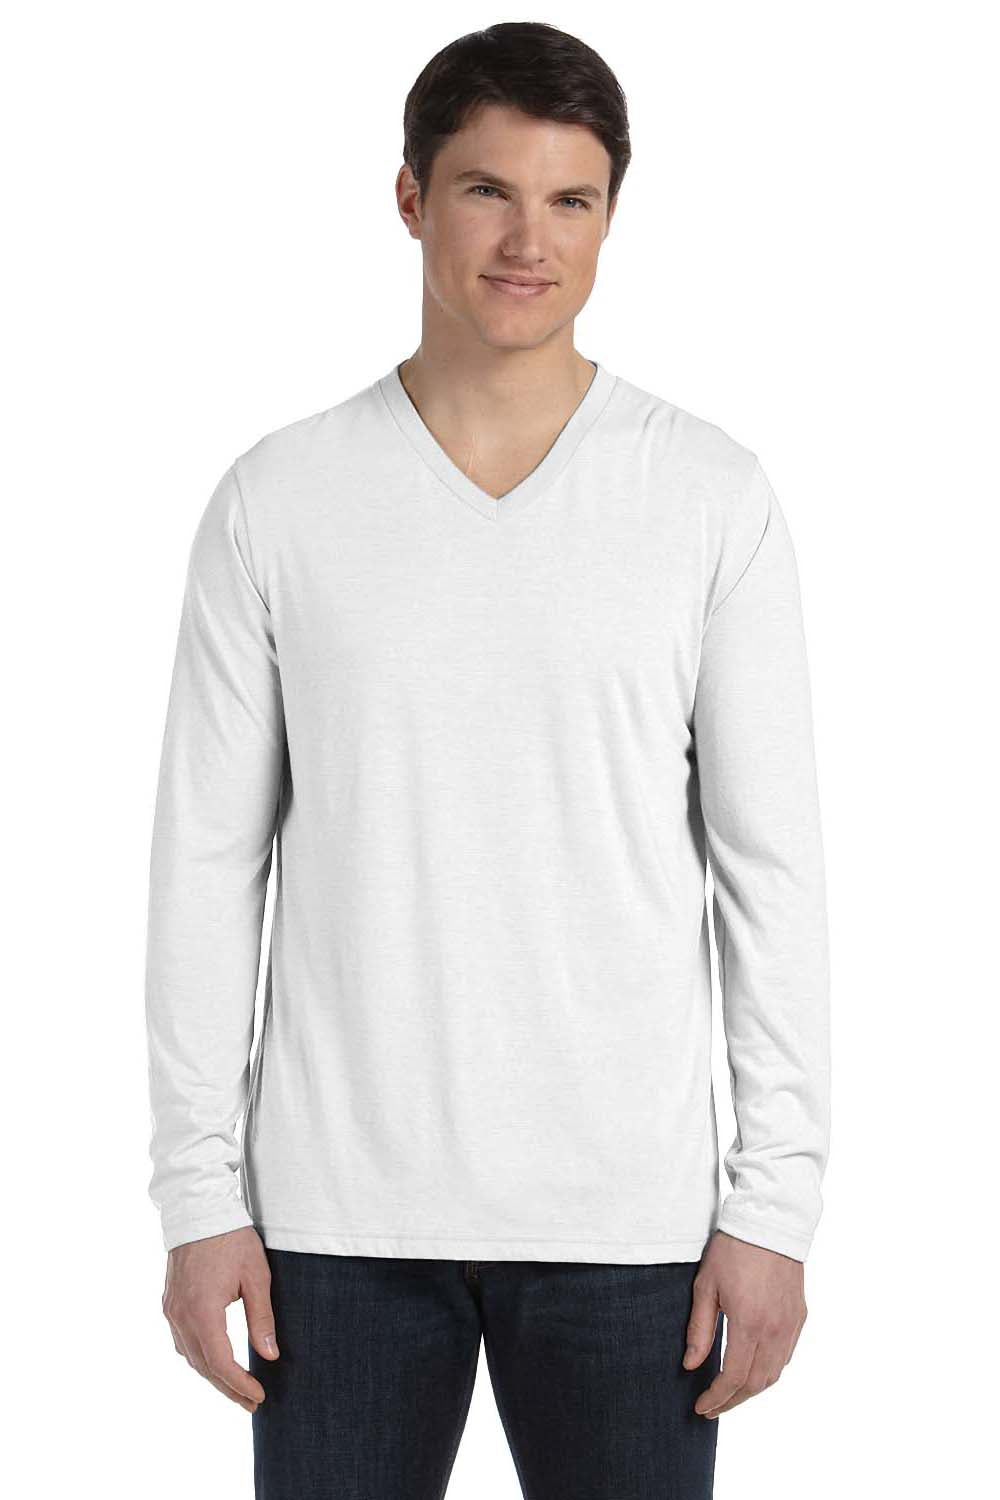 Bella + Canvas 3425 Mens Jersey Long Sleeve V-Neck T-Shirt White Front